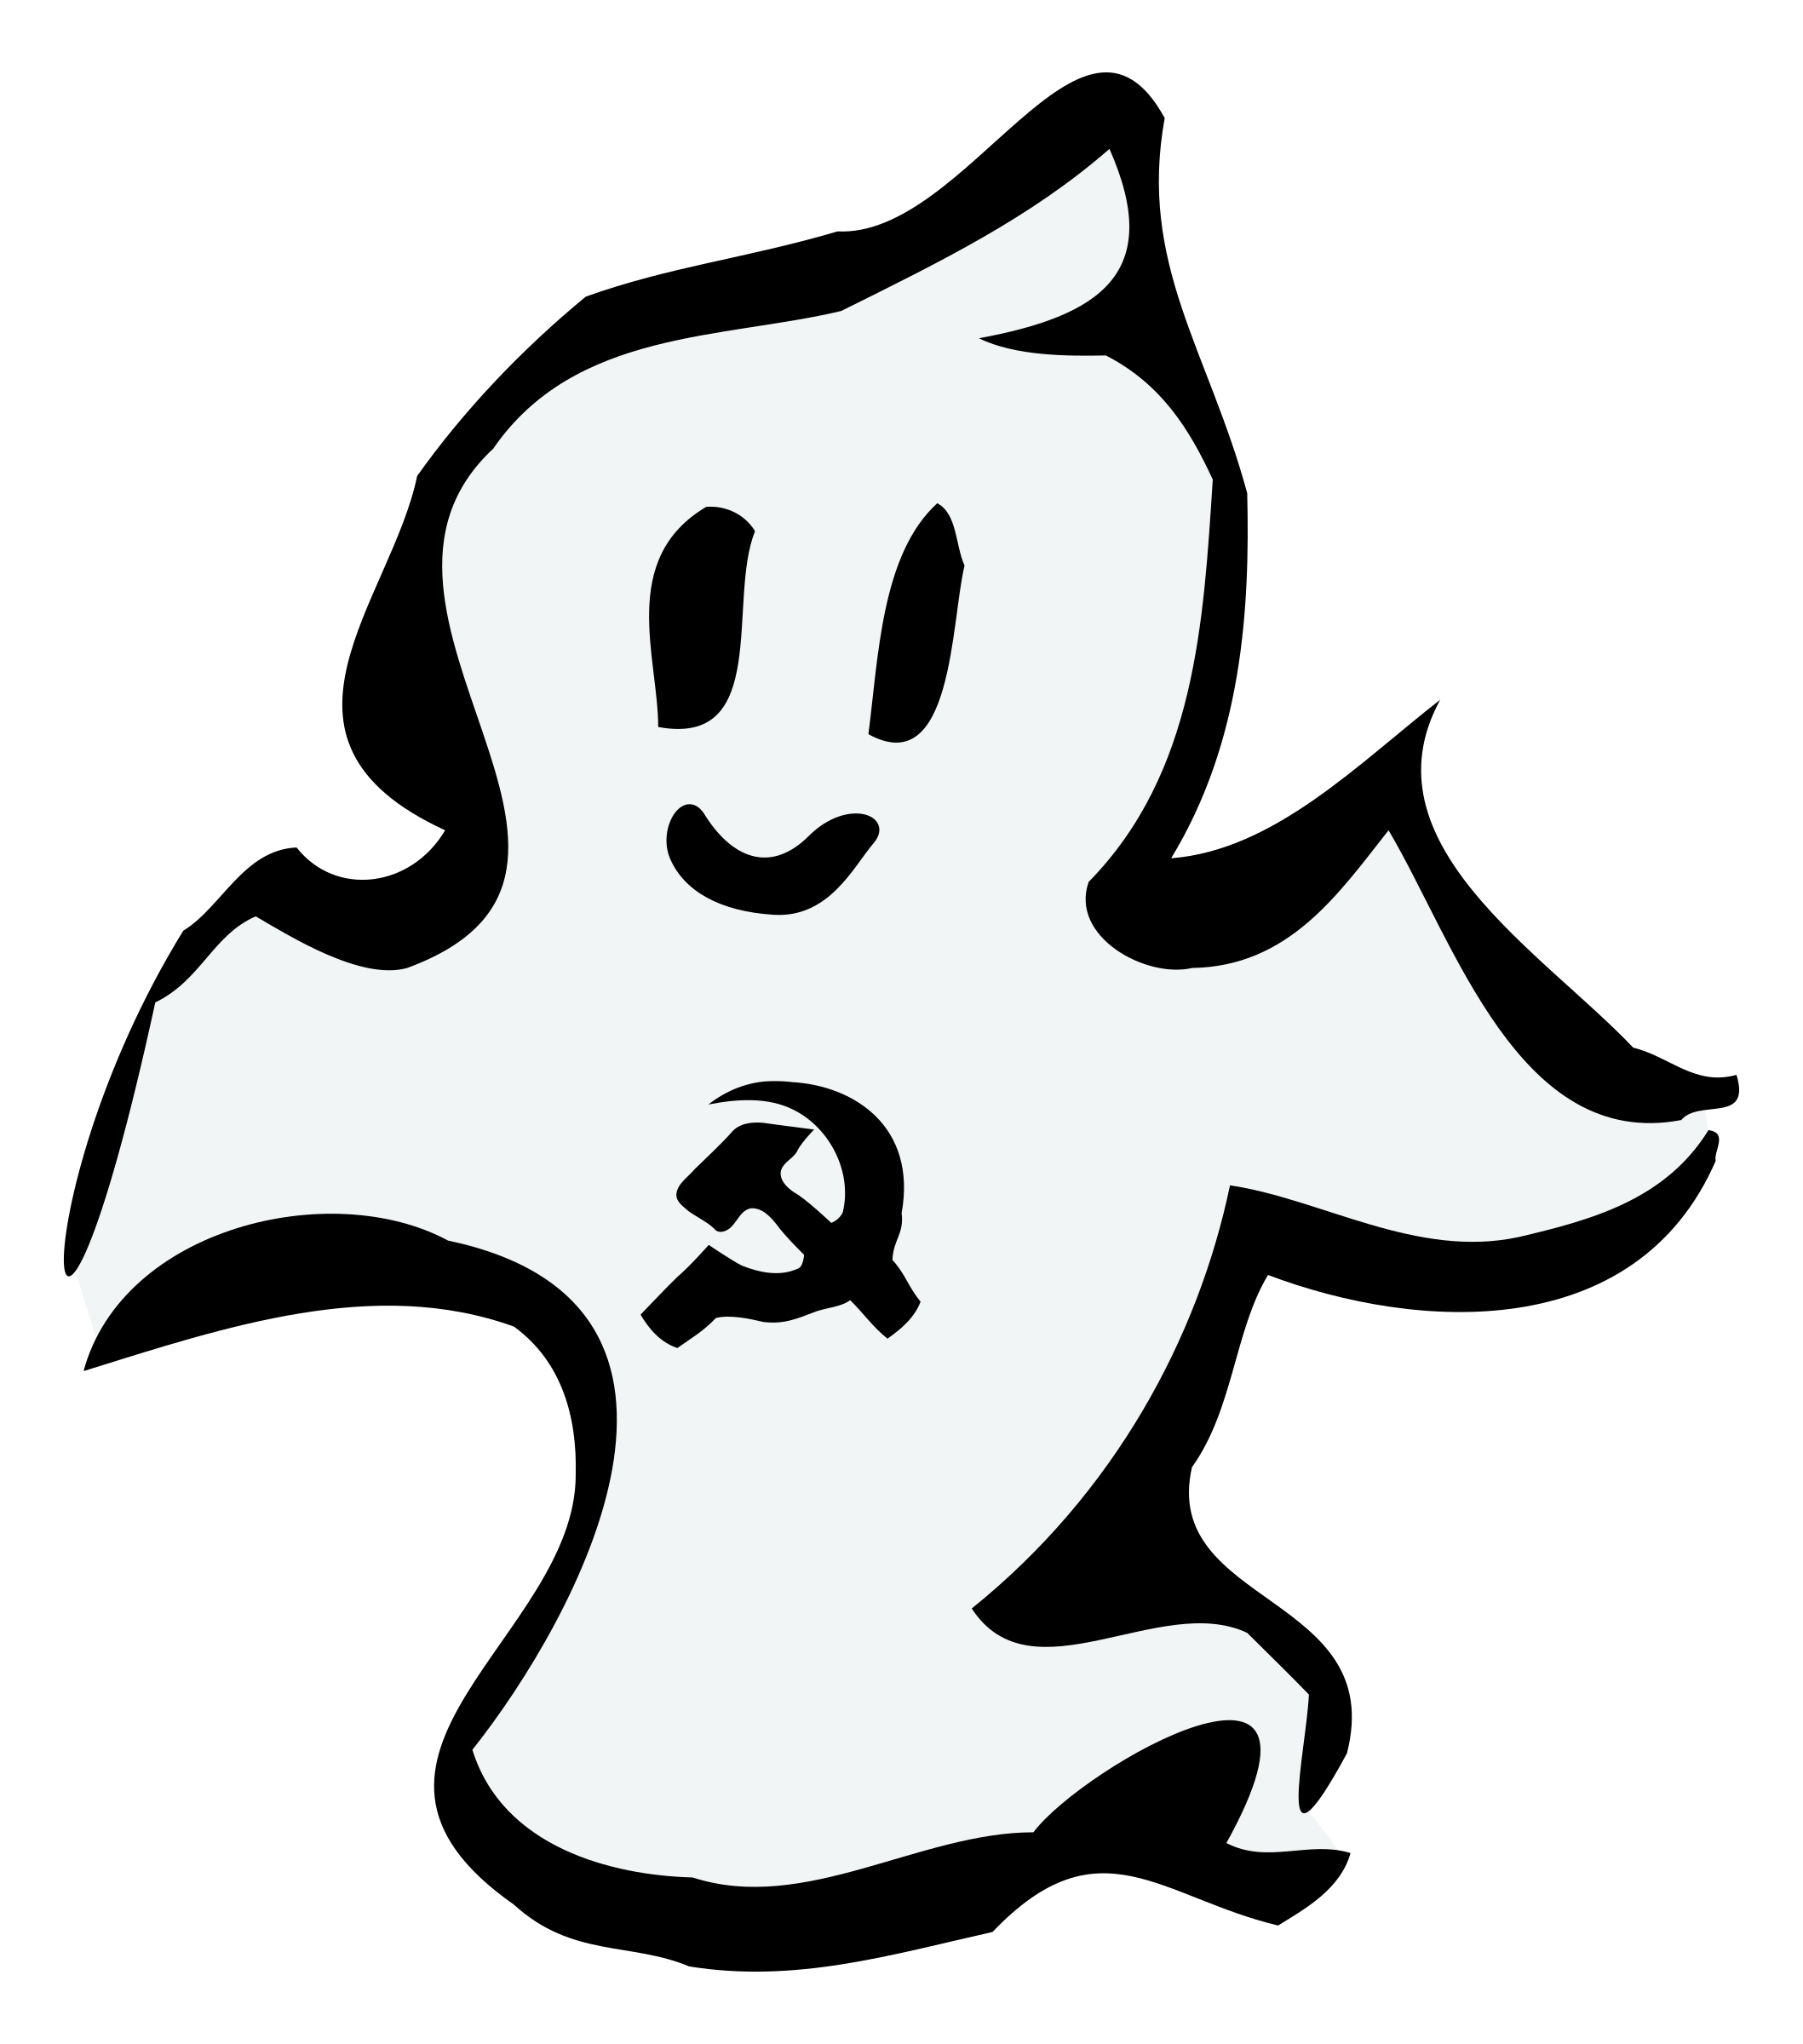 spectre ghost meaning